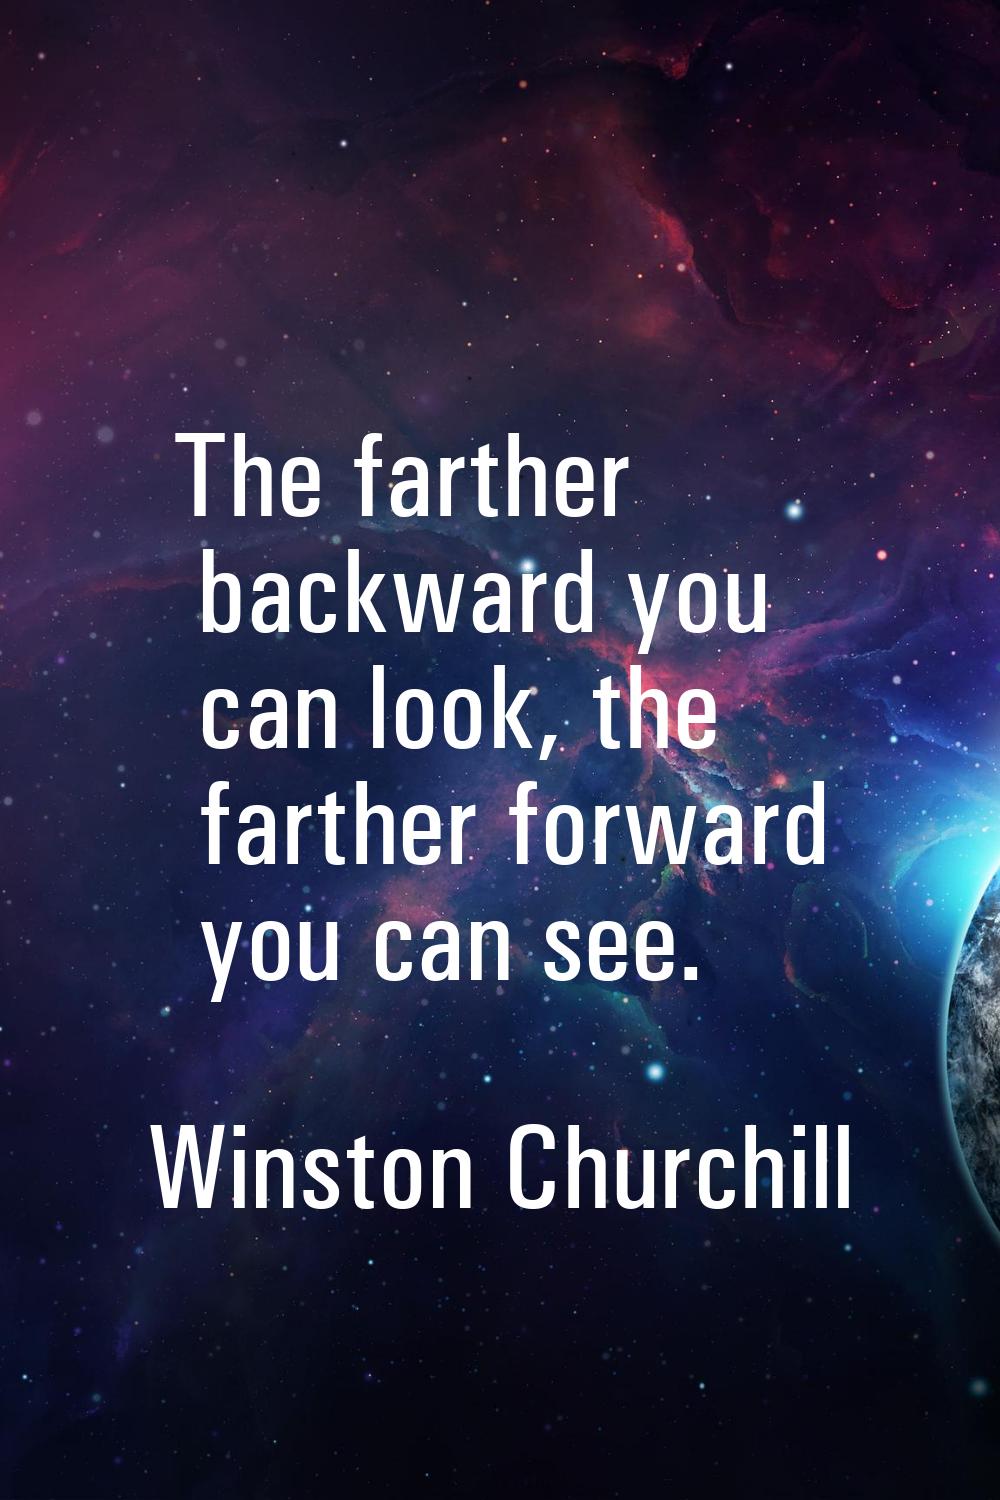 The farther backward you can look, the farther forward you can see.